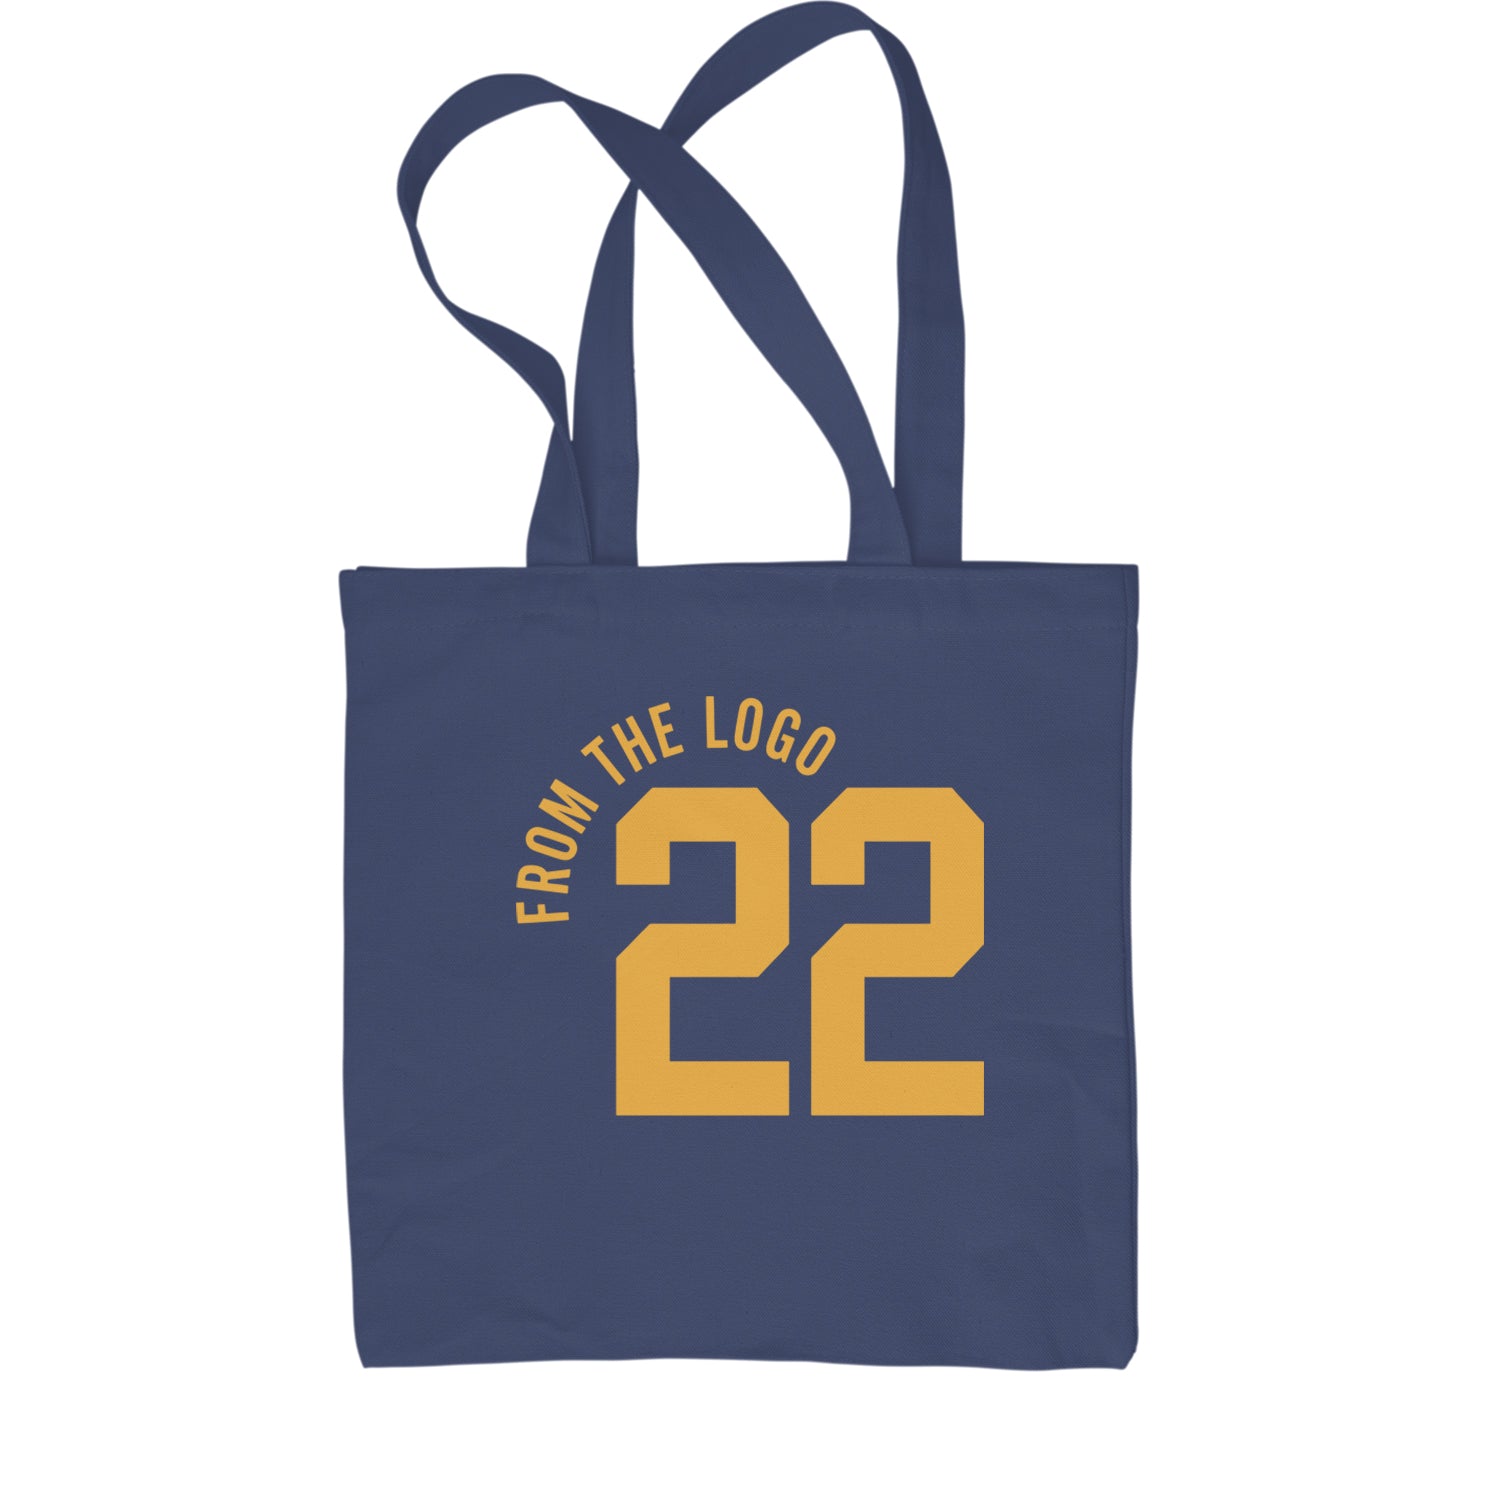 From The Logo #22 Basketball Shopping Tote Bag